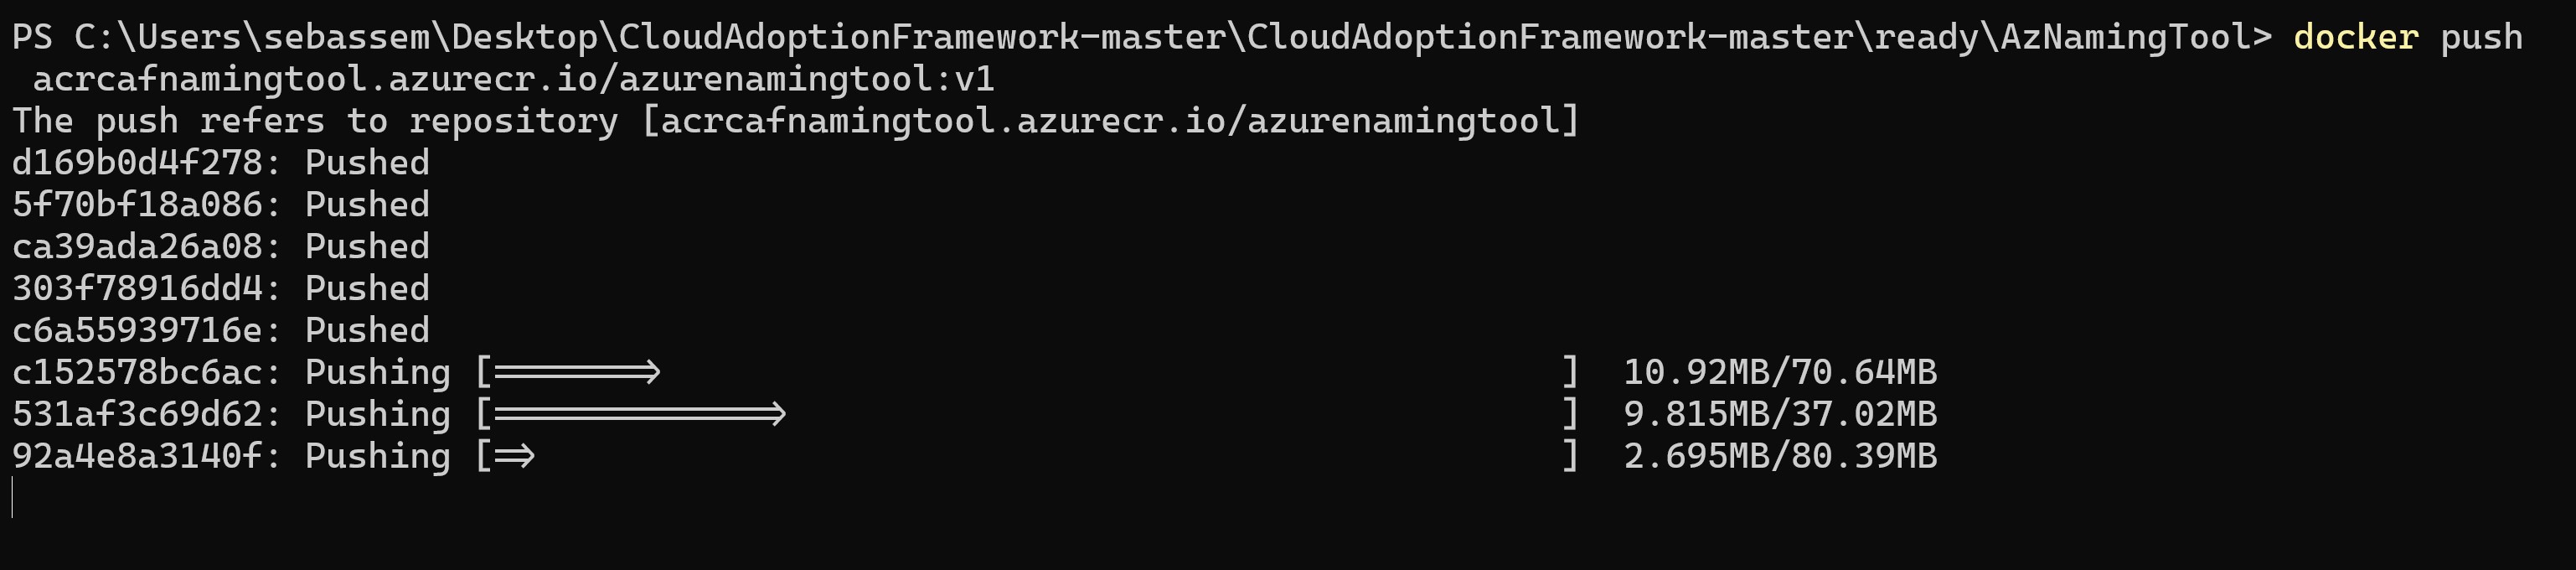 Screenshot showing pushing the image to the Azure Container registry